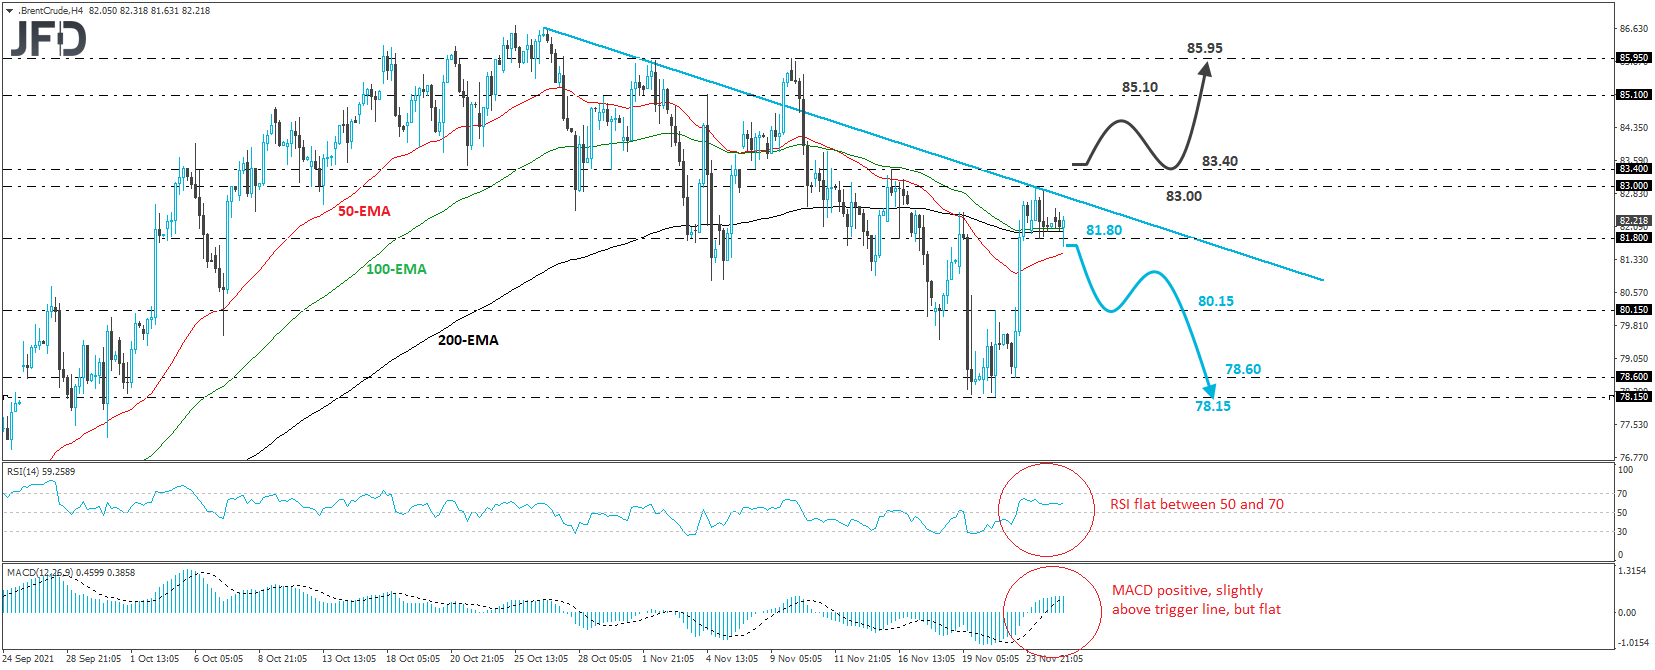 Brent crude oil 4-hour chart technical analysis.